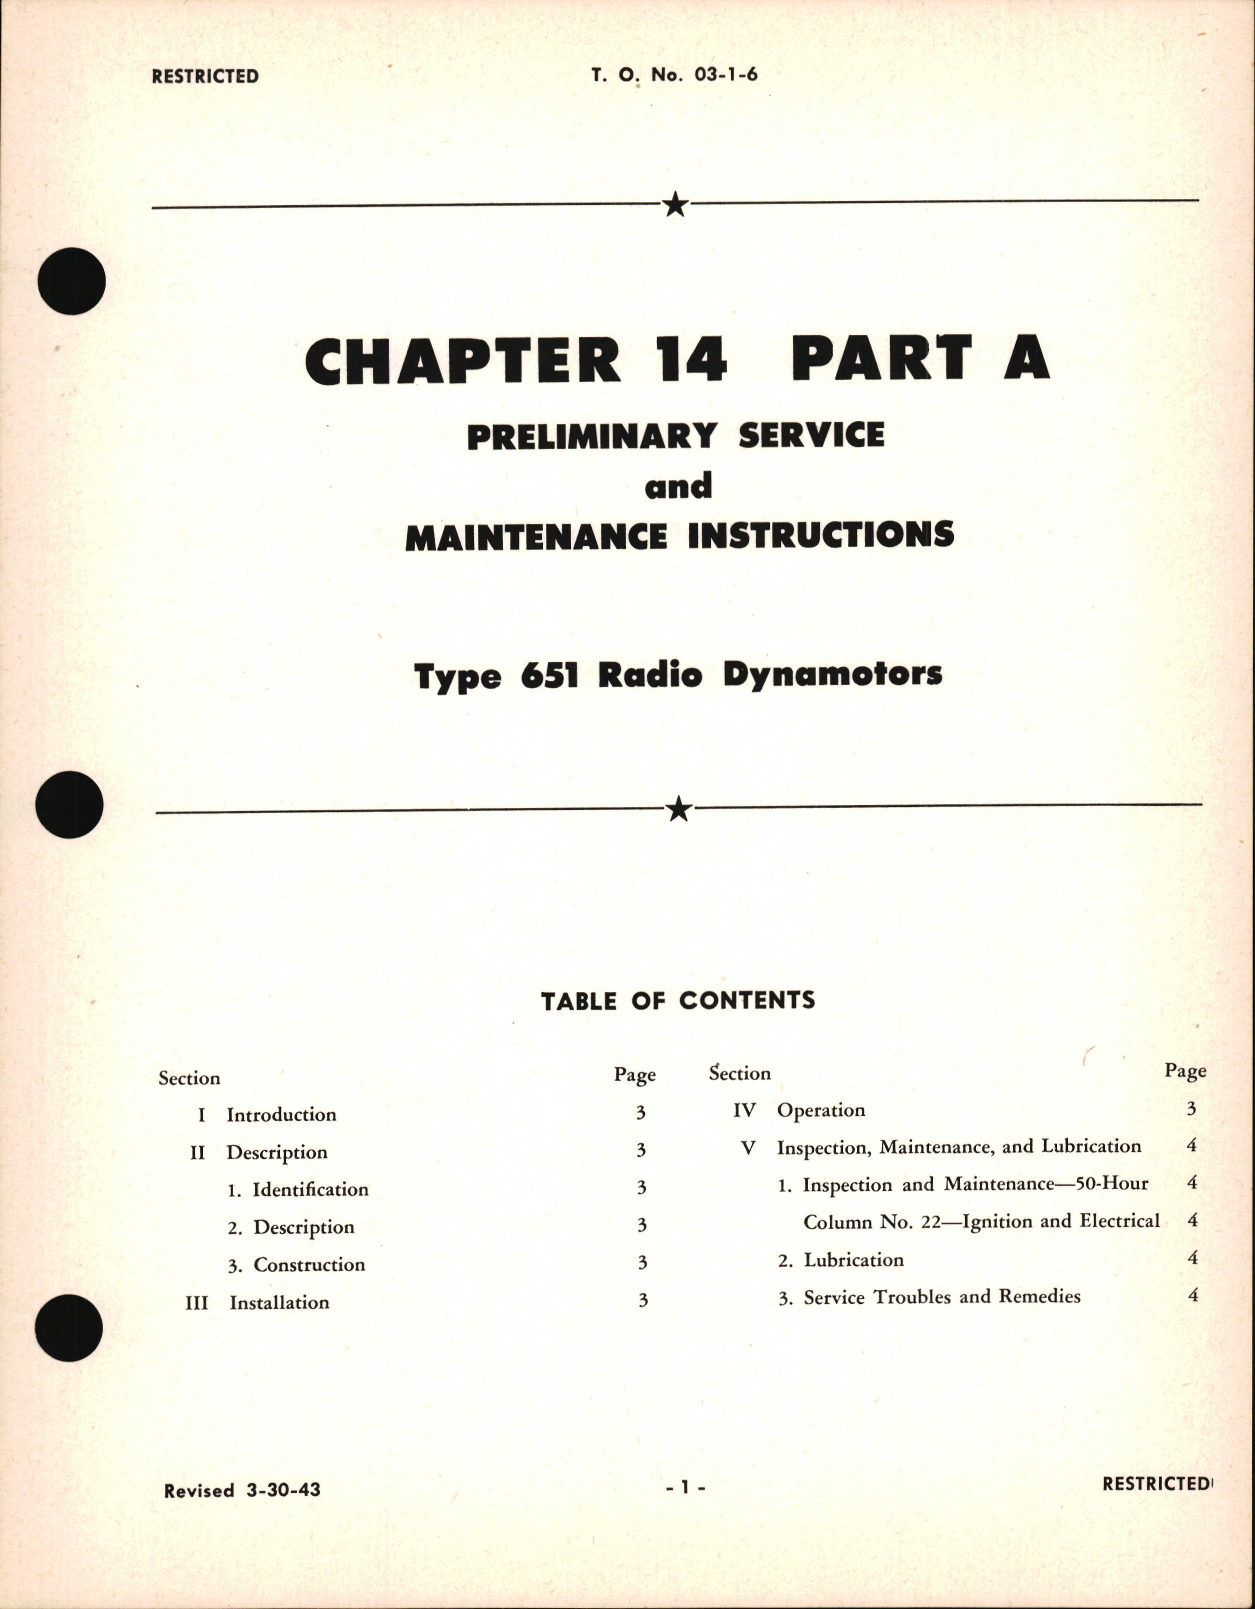 Sample page 1 from AirCorps Library document: Preliminary Service and Maintenance Instructions for Type 651 Radio Dynamotors